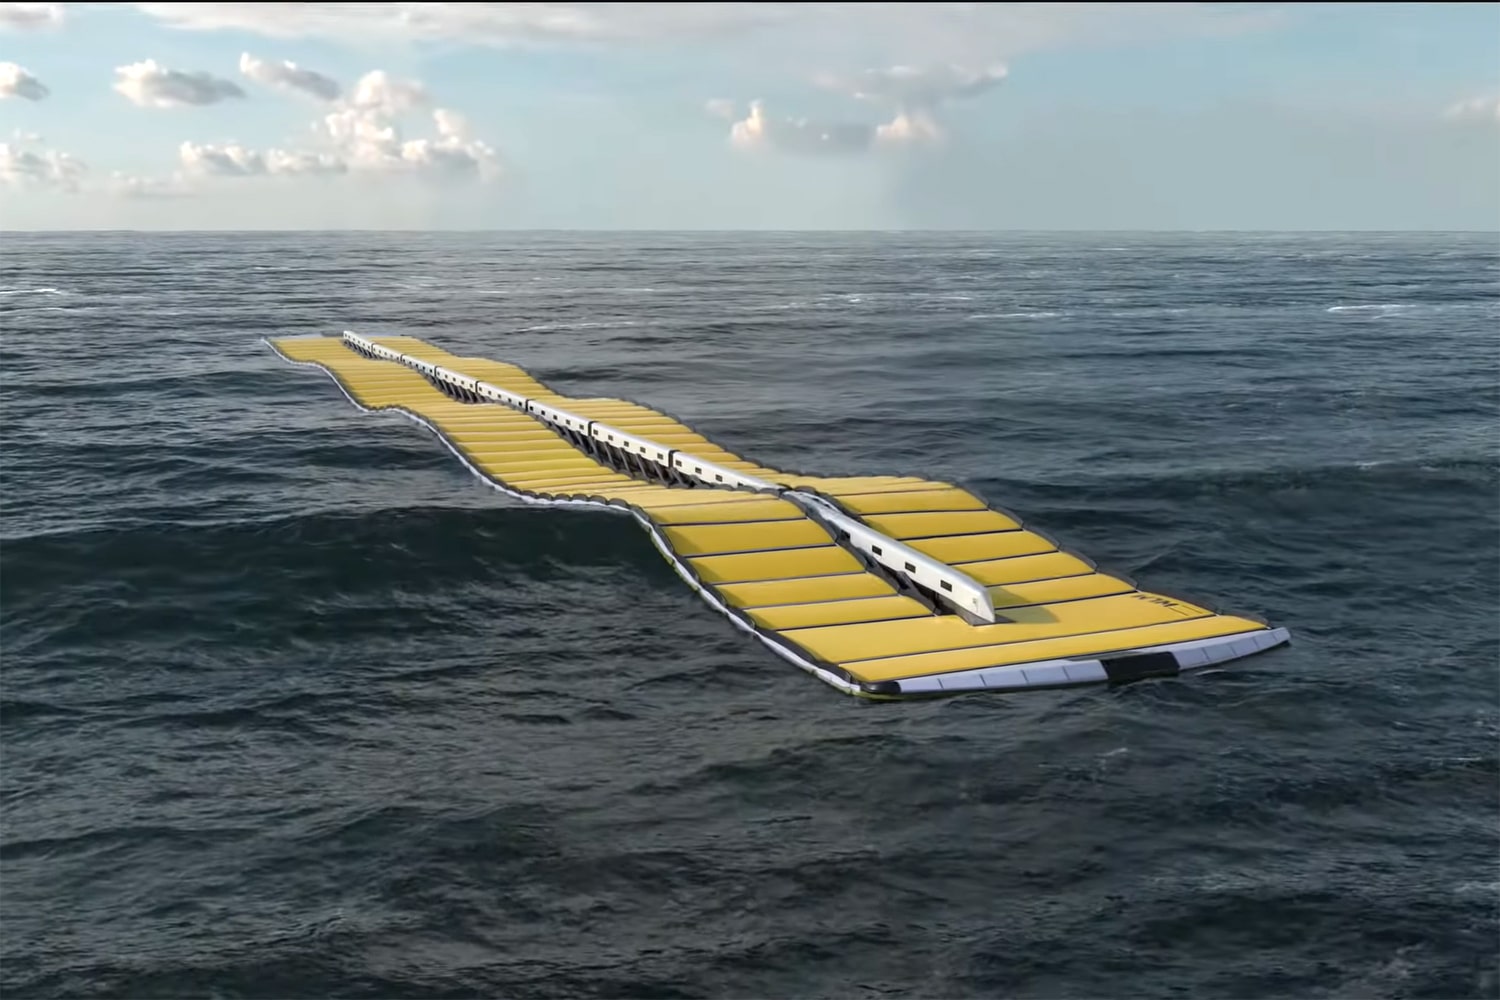 SWEL's Waveline Magnet concept can convert wave power into electricity.